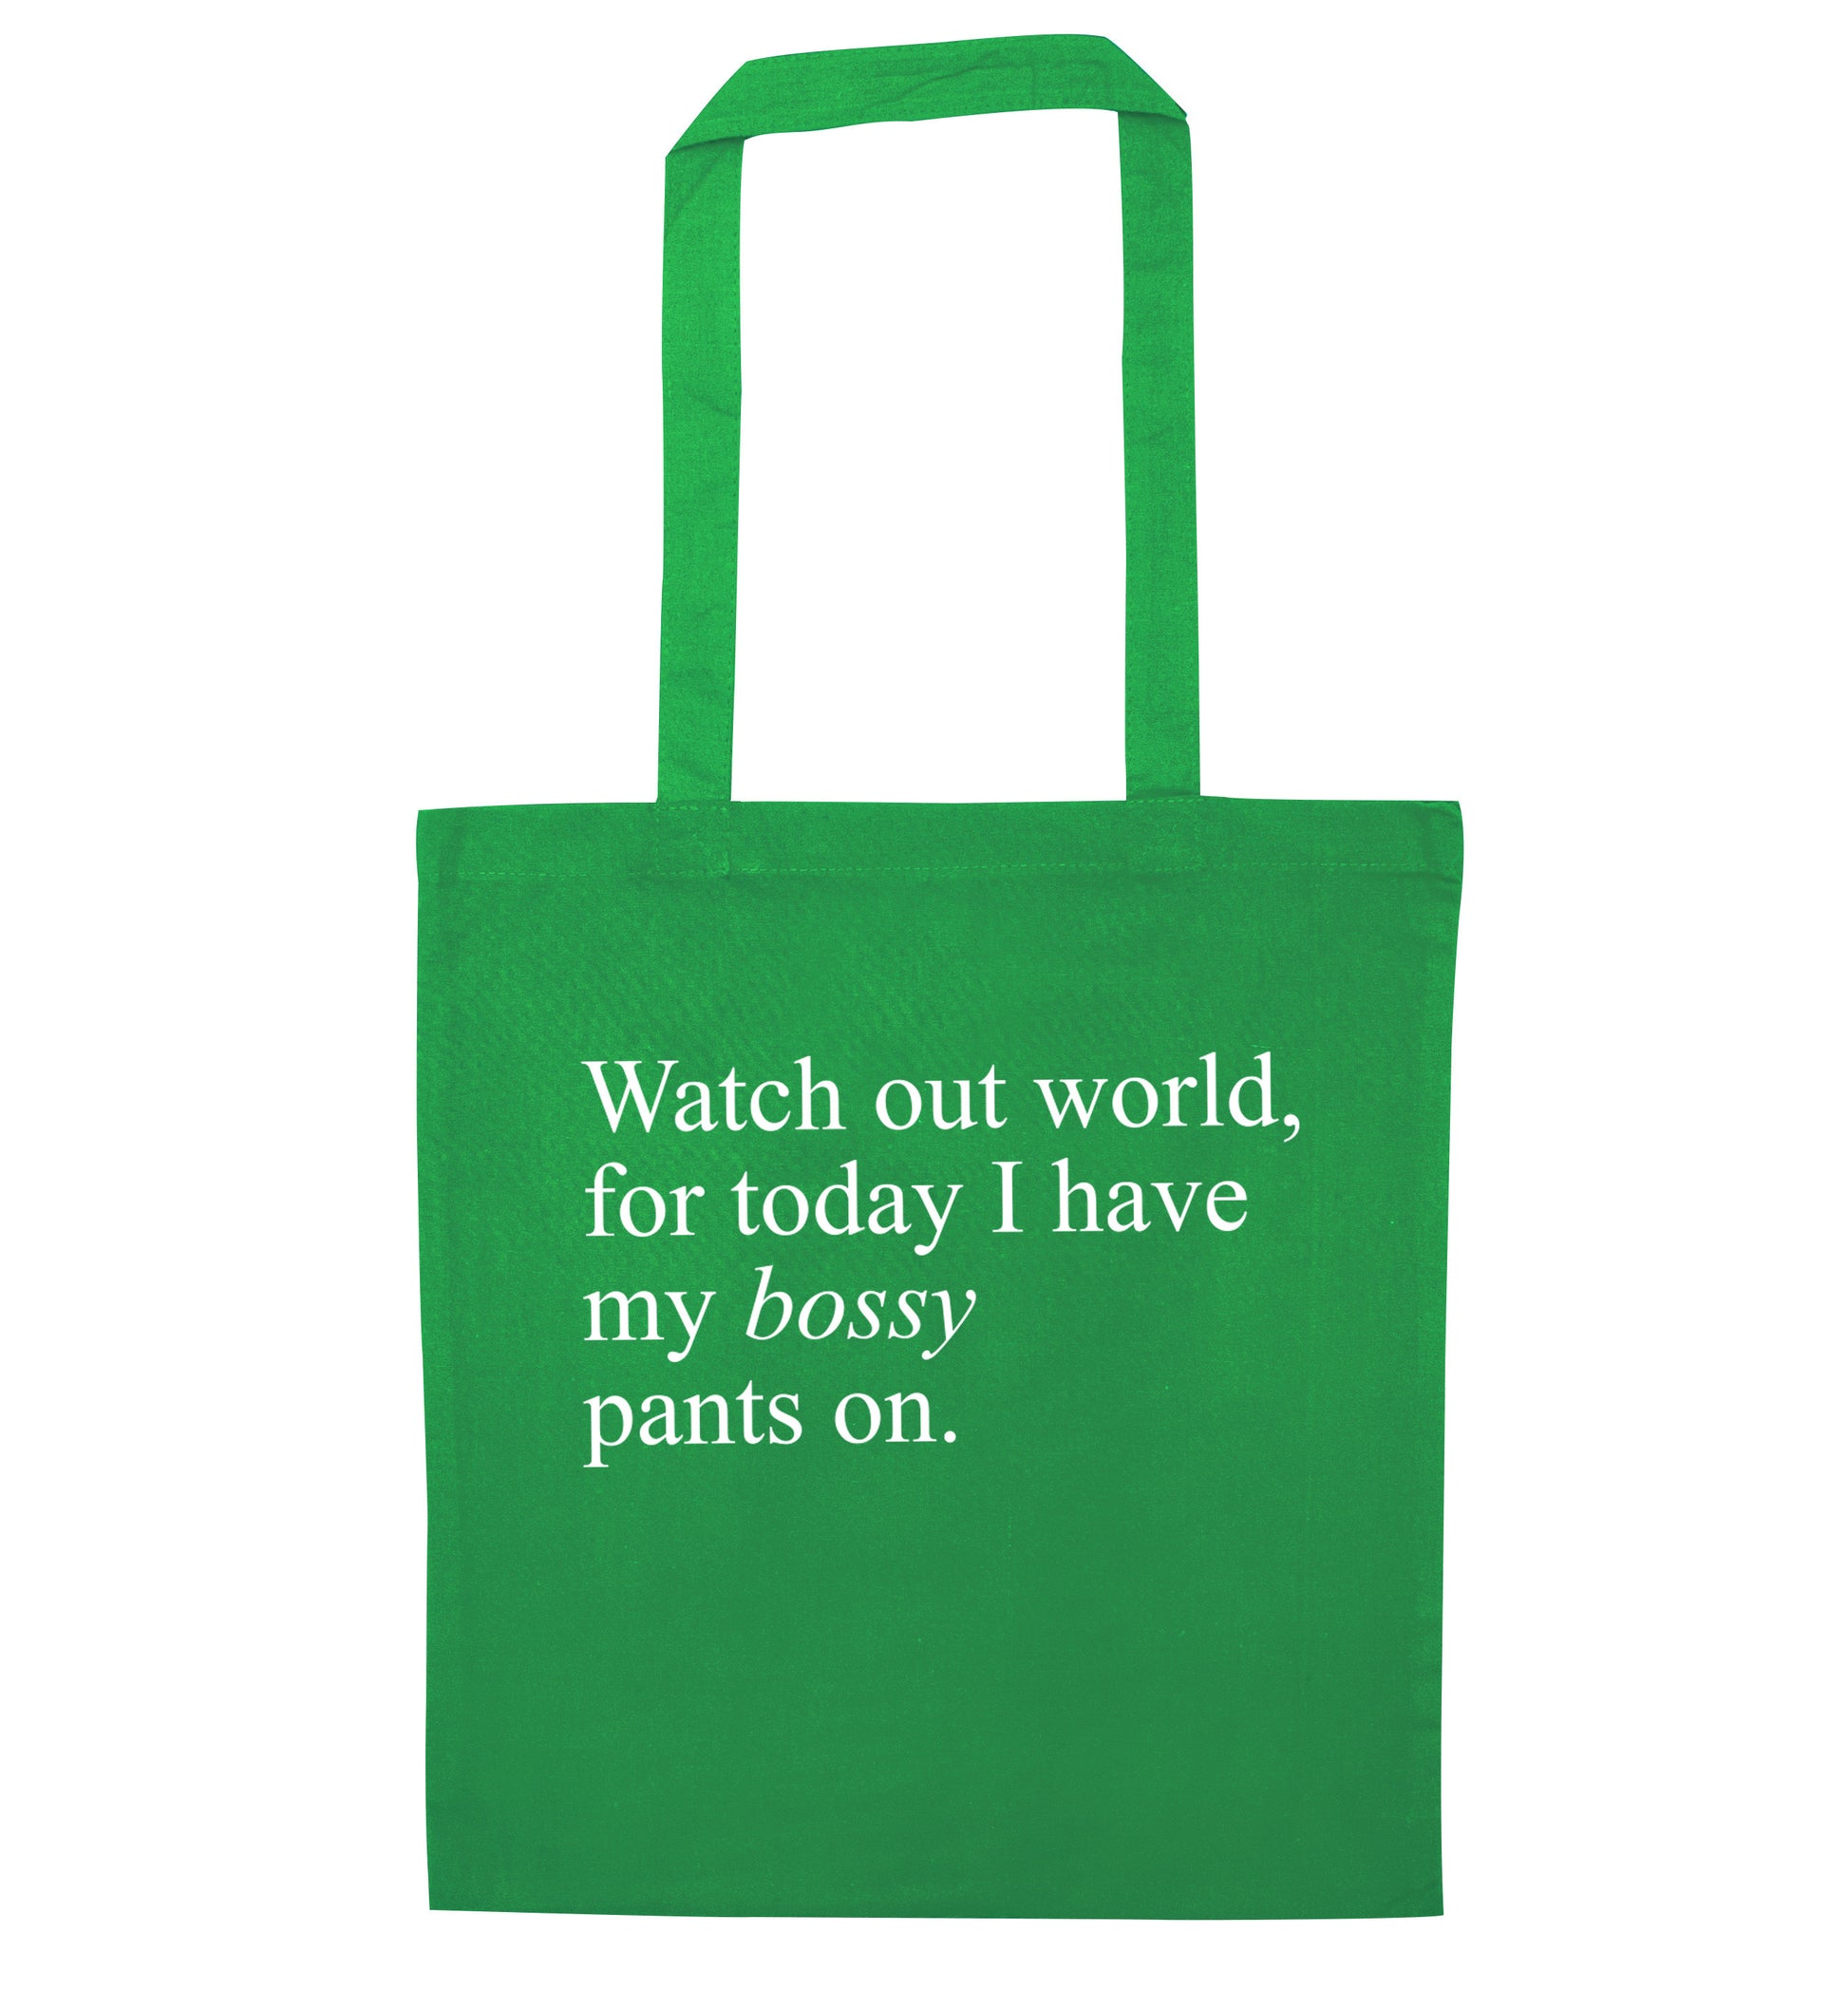 Watch out world, for today I have my bossy pants on green tote bag